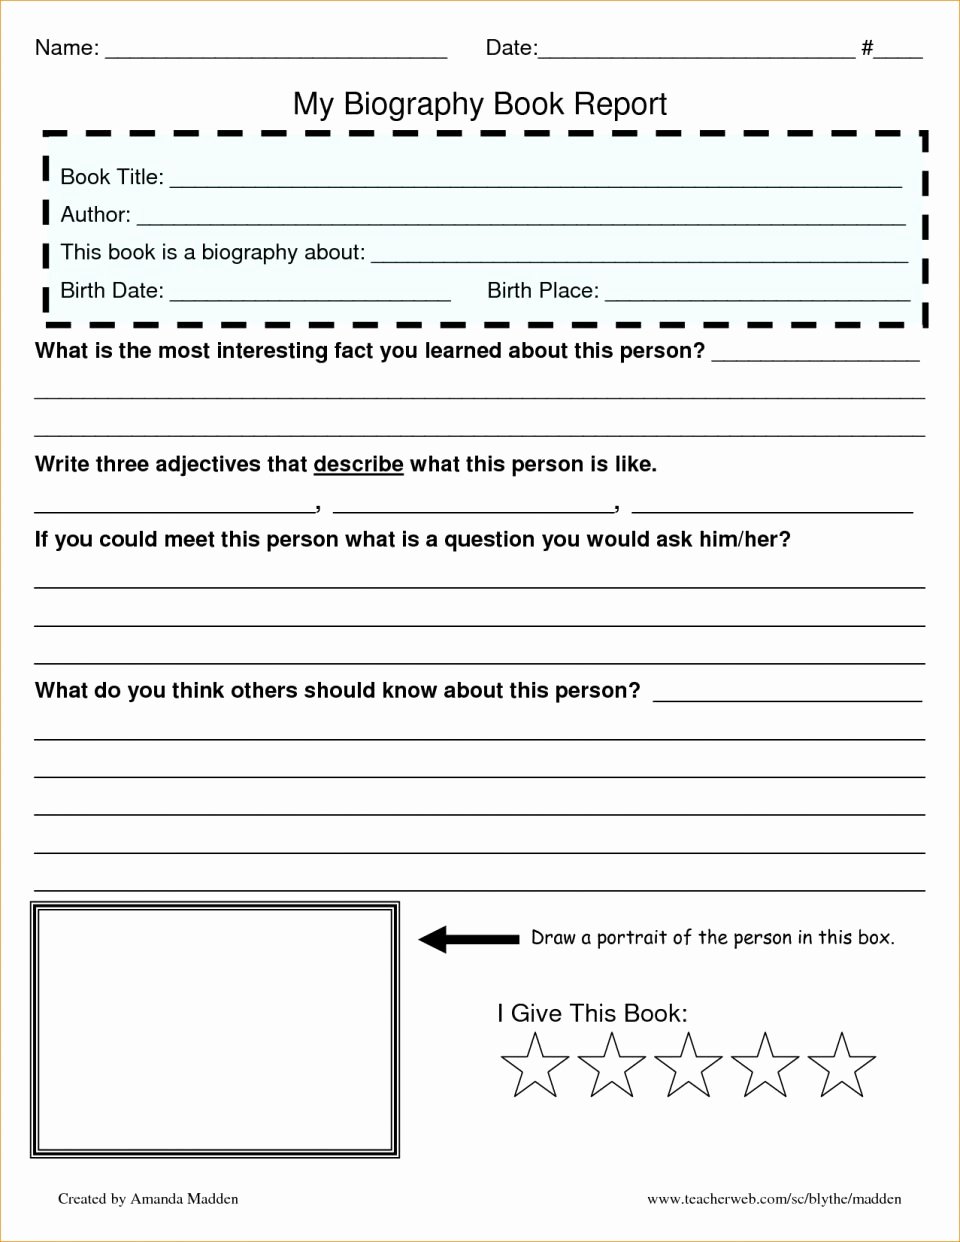 Biography Report Template Pdf Best Of Report Biography Template Book Pdf File Works for Any